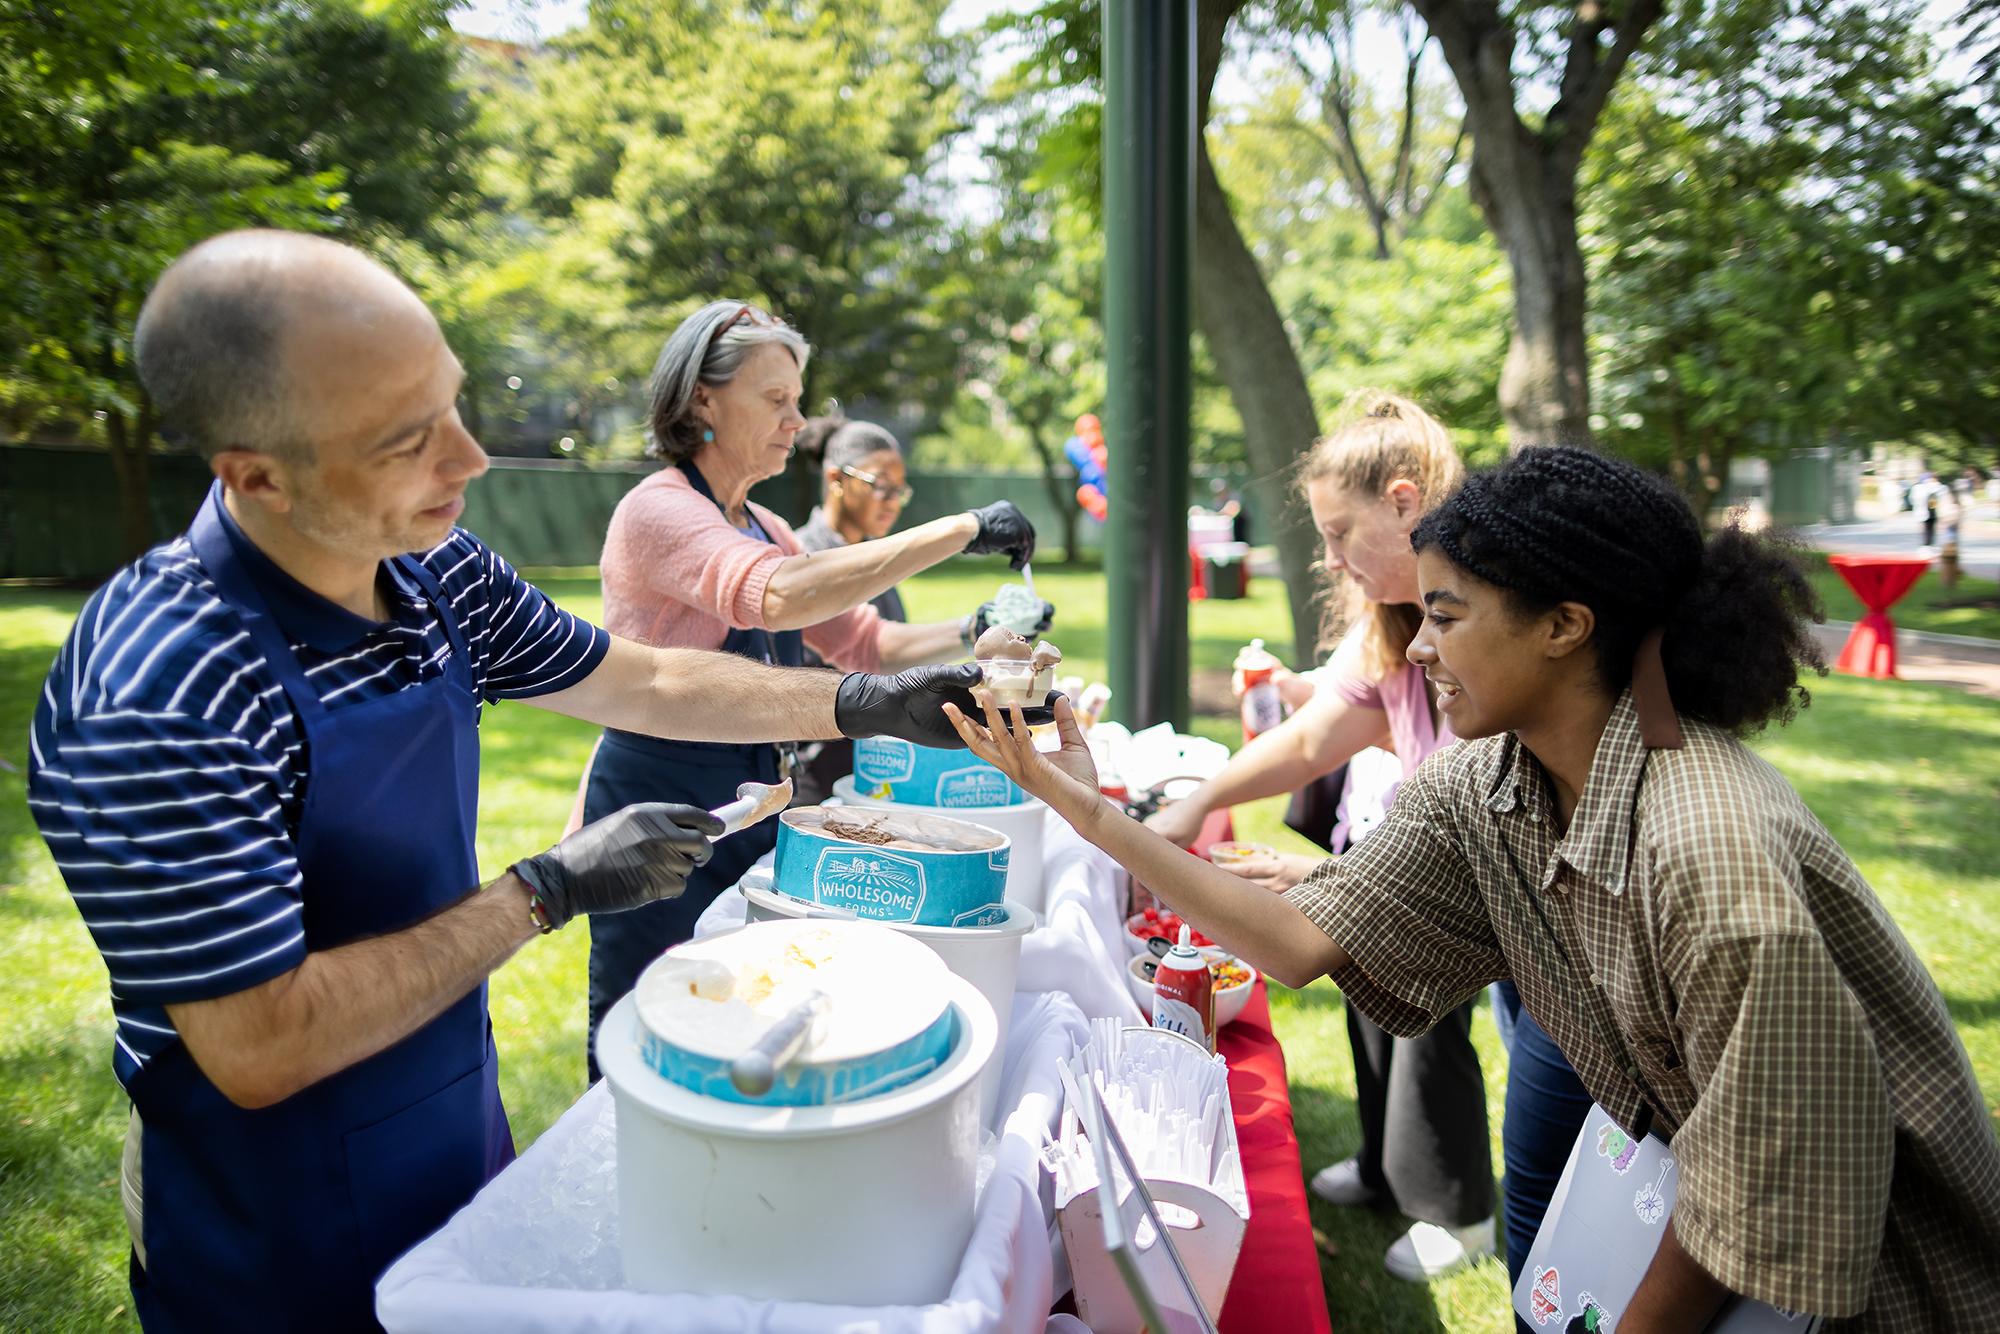 Mike Citro scoops ice cream for a guest on College Green.